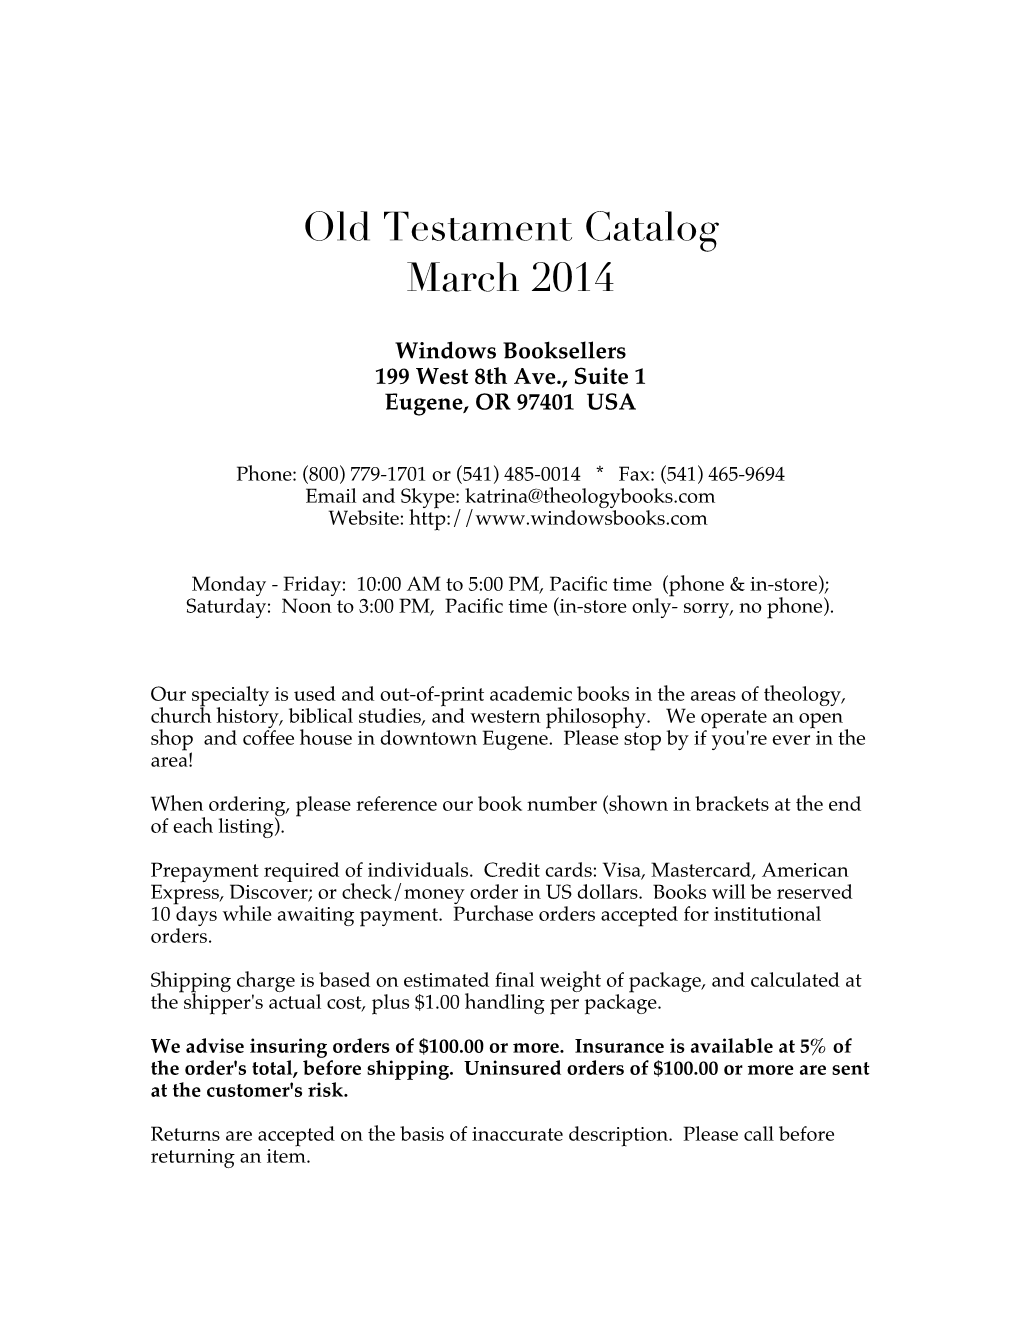 Old Testament Catalog March 2014